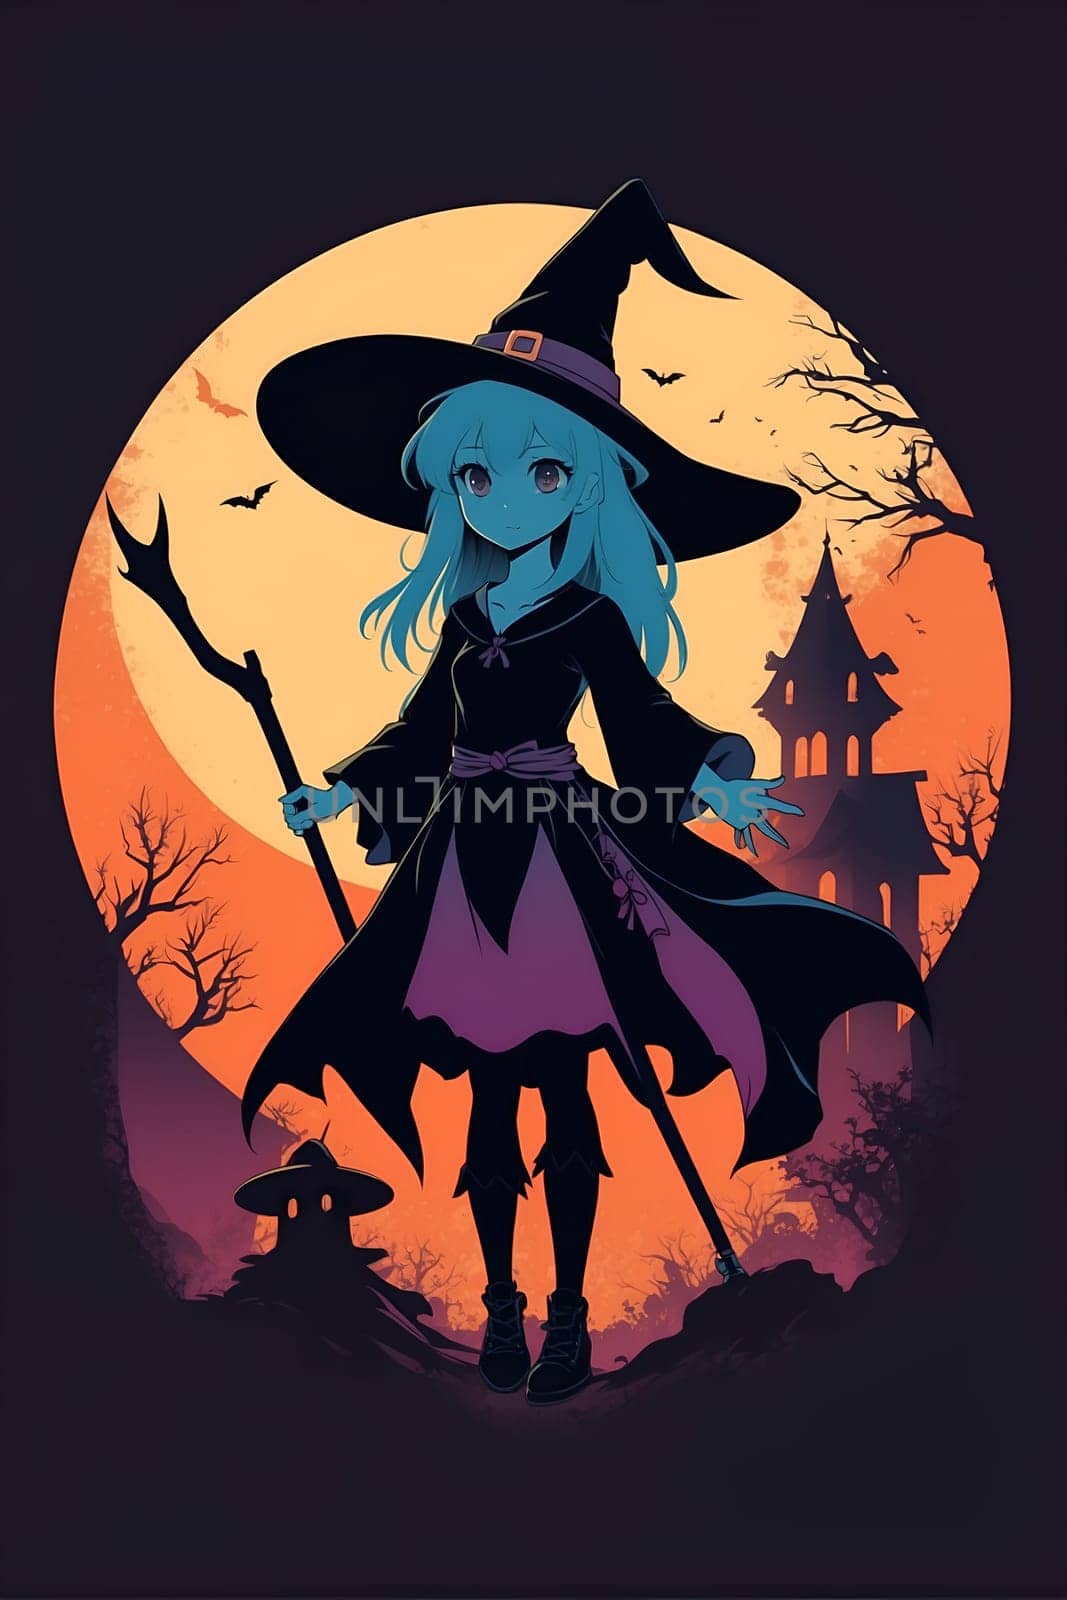 A girl dressed as a witch stands in front of a full moon, creating an enchanting scene.